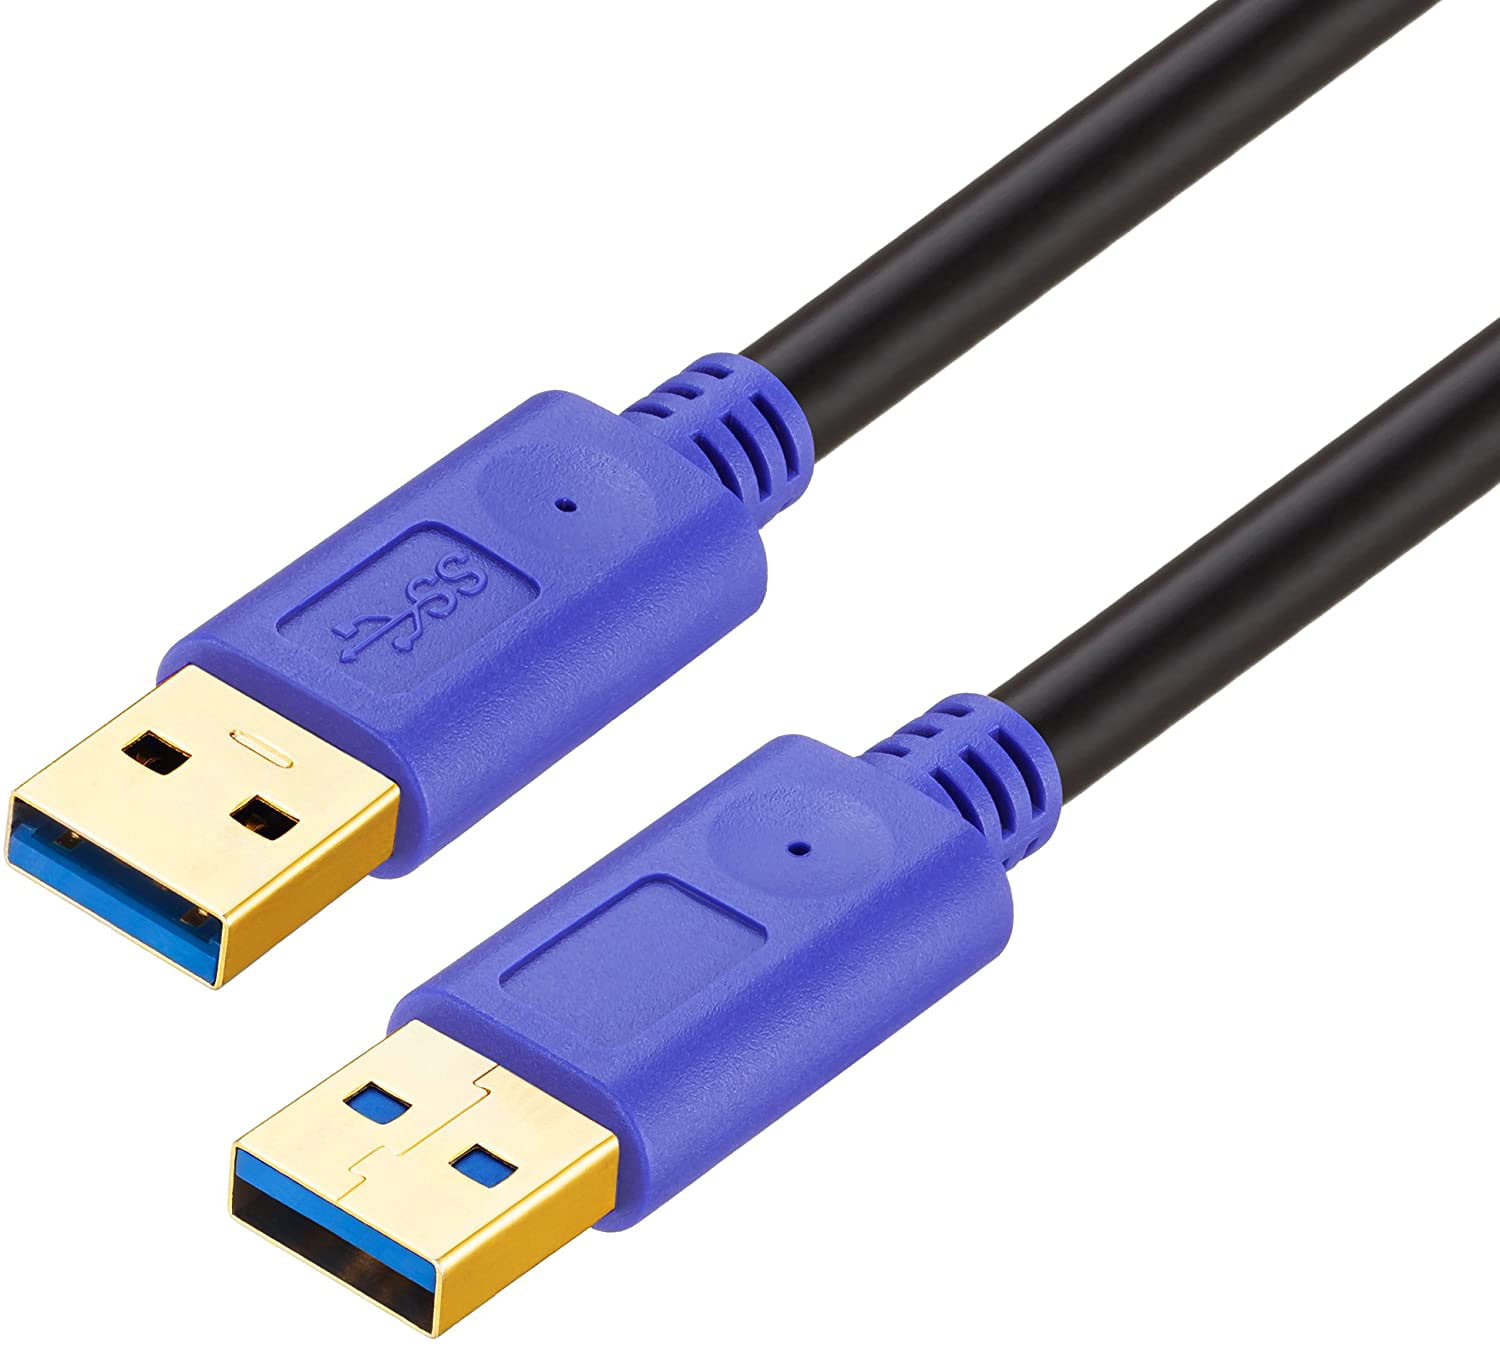 USB 3.0 Male to Male Cable Super Speed 5Gbps for Data Transfer Hard Drive Cord 